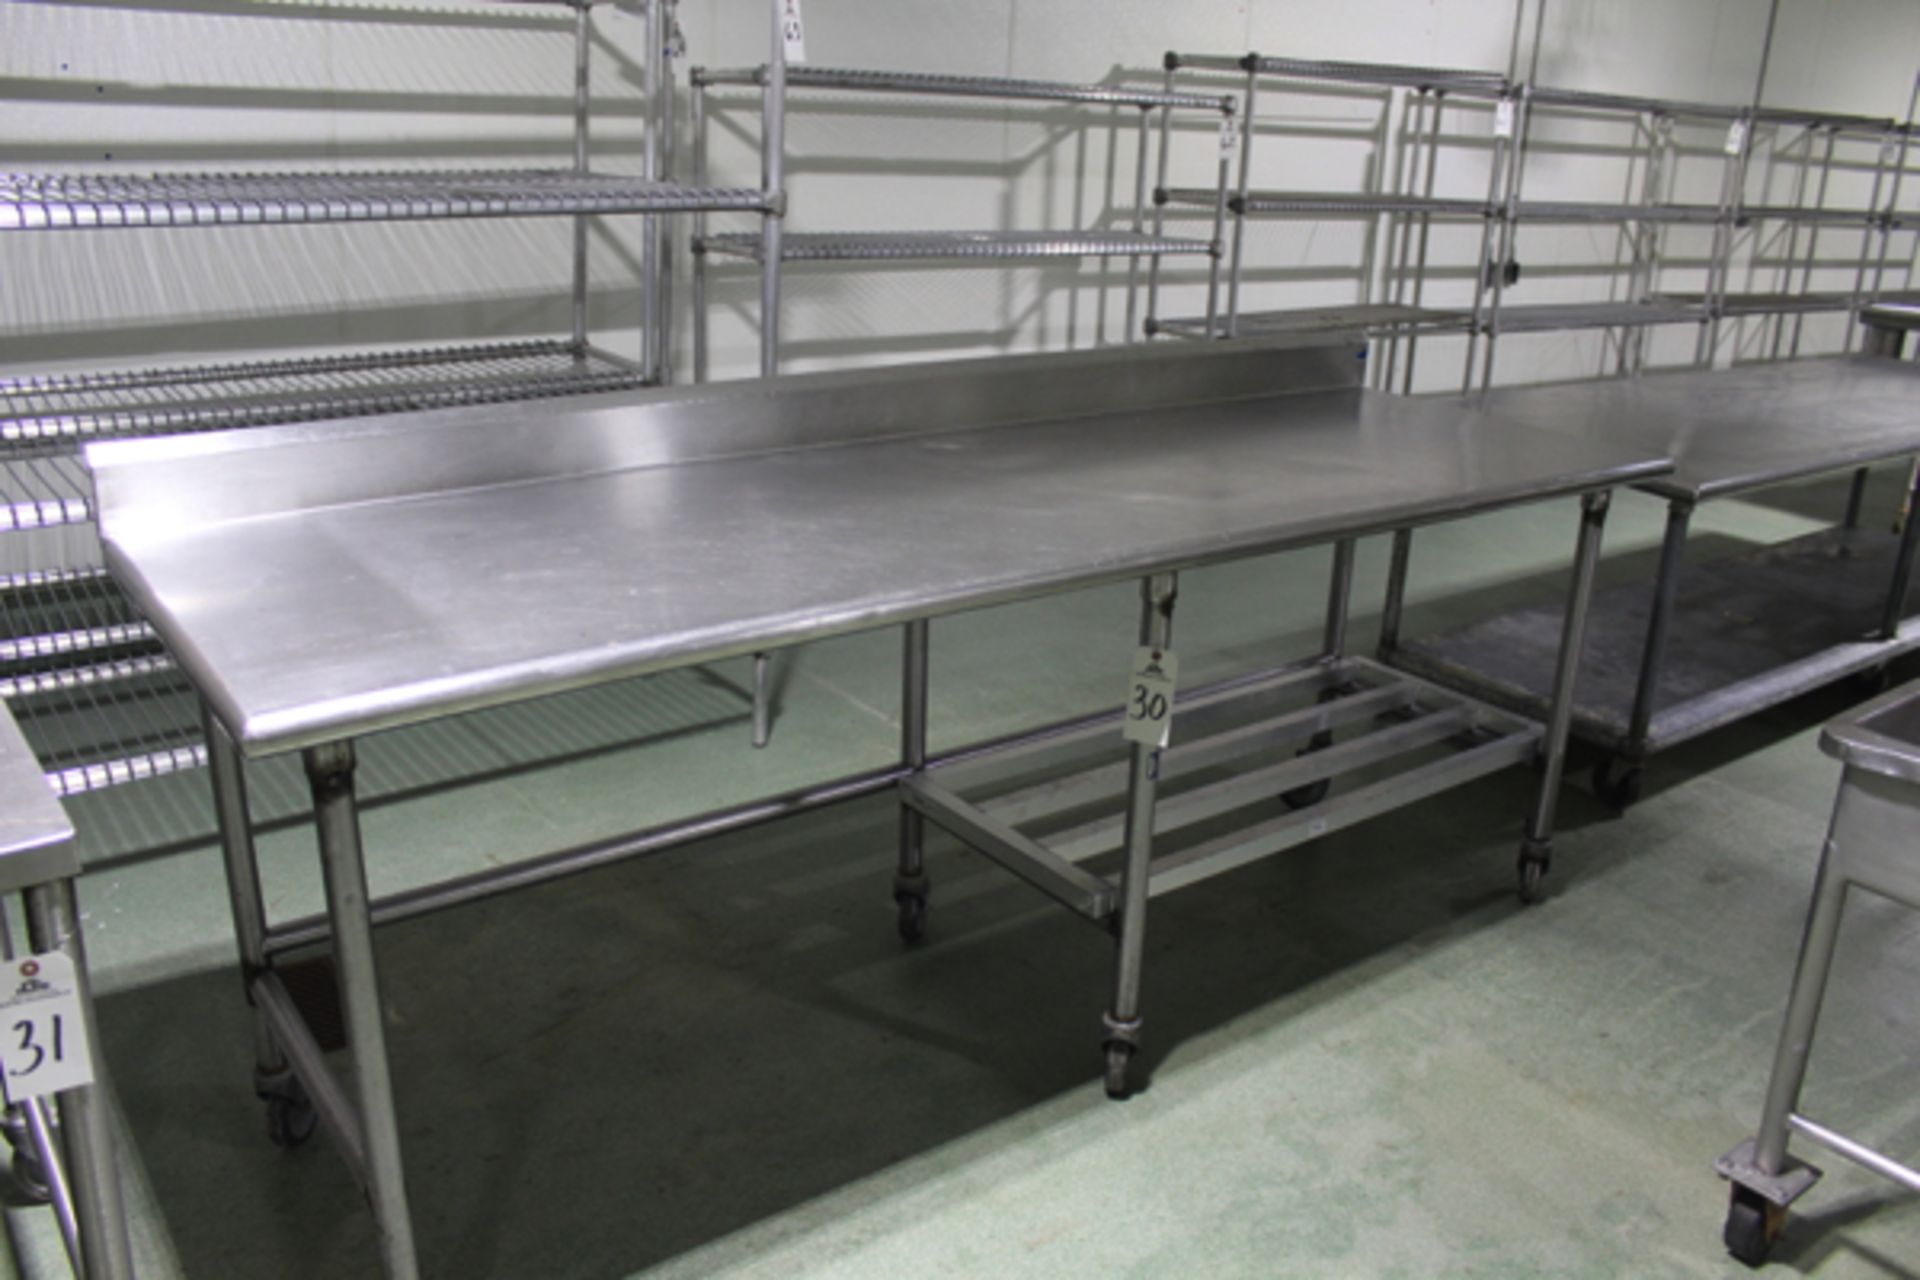 Stainless Steel Prep Table, 29" x 8' | Loading Price: $25 Or Buyer May Hand Carry By February 3rd,